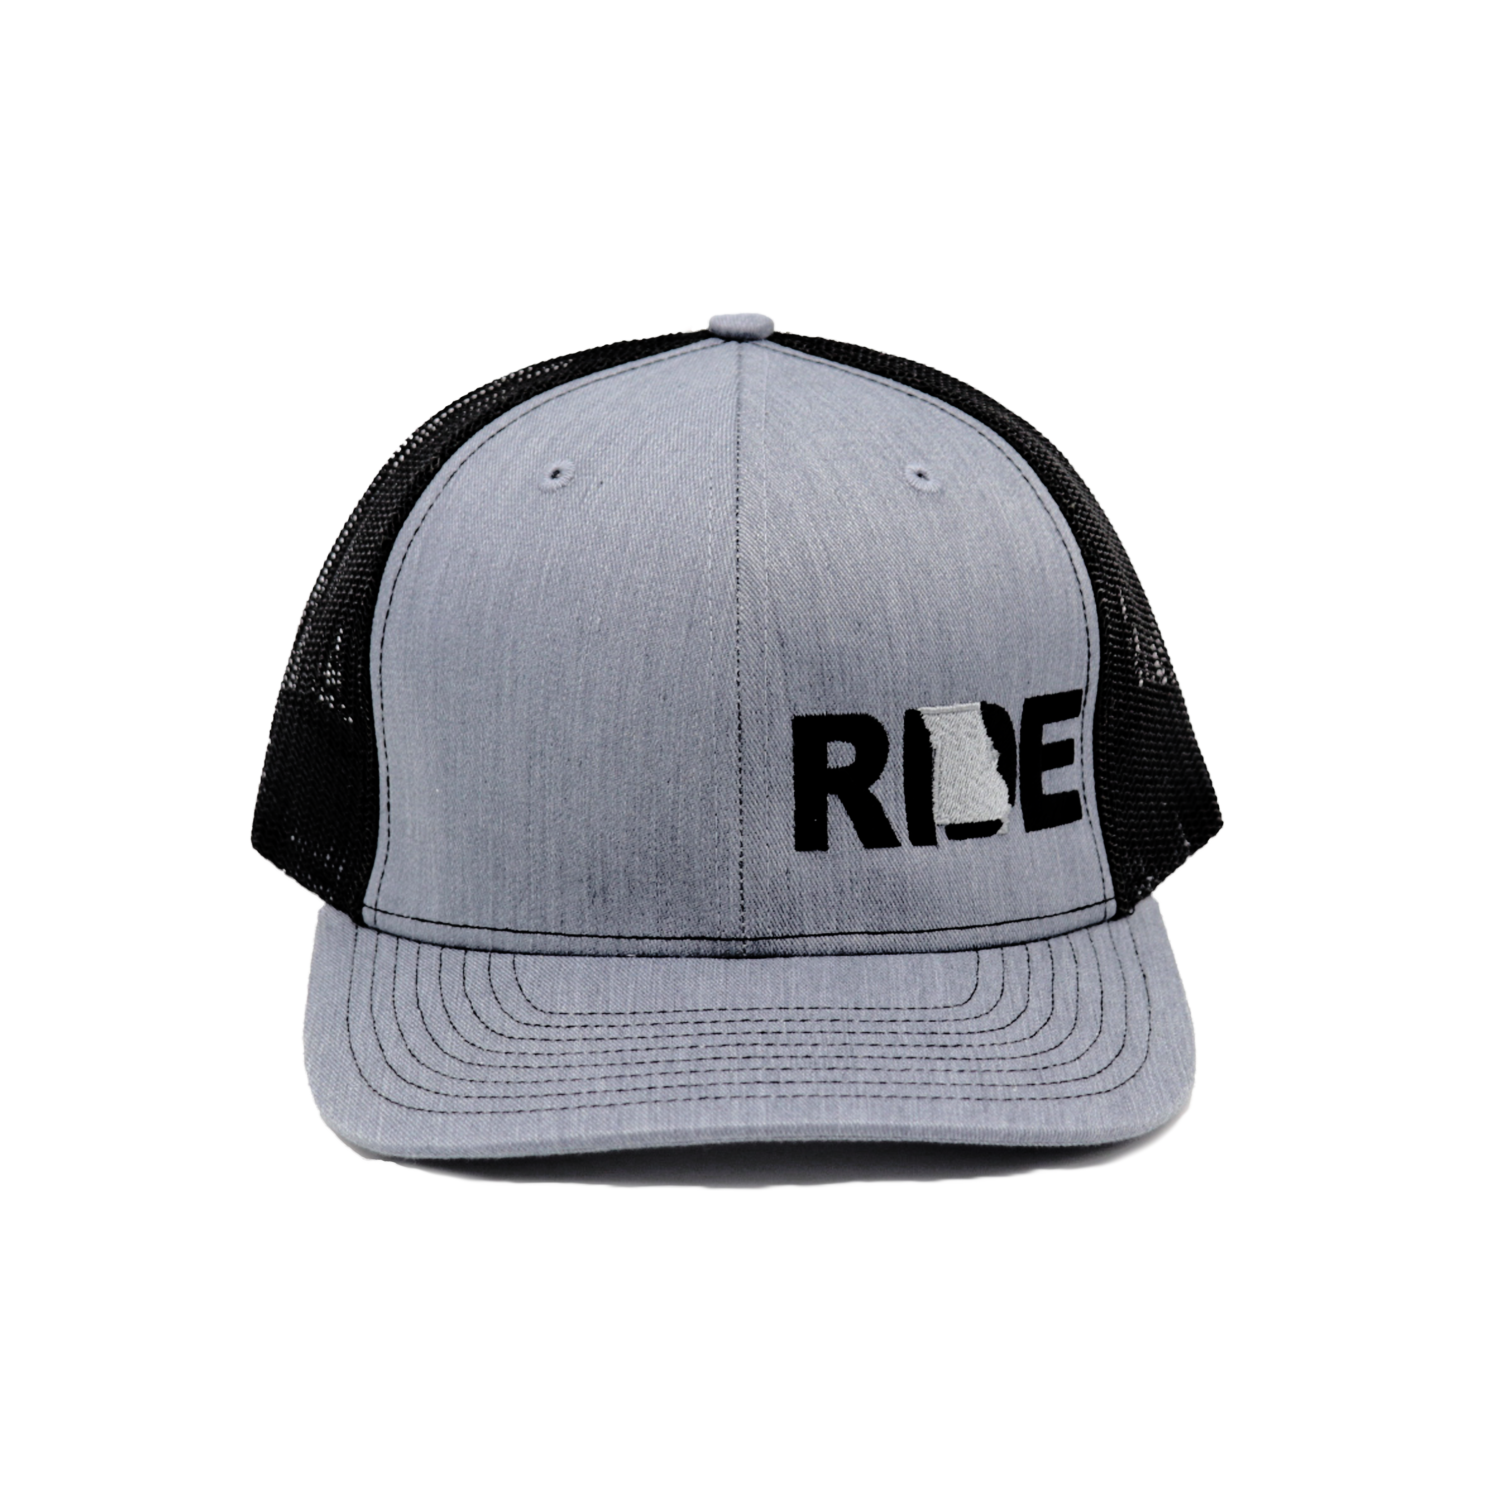 Ride Missouri Night Out Pro Embroidered Snapback Trucker Hat Heather Gray/Black